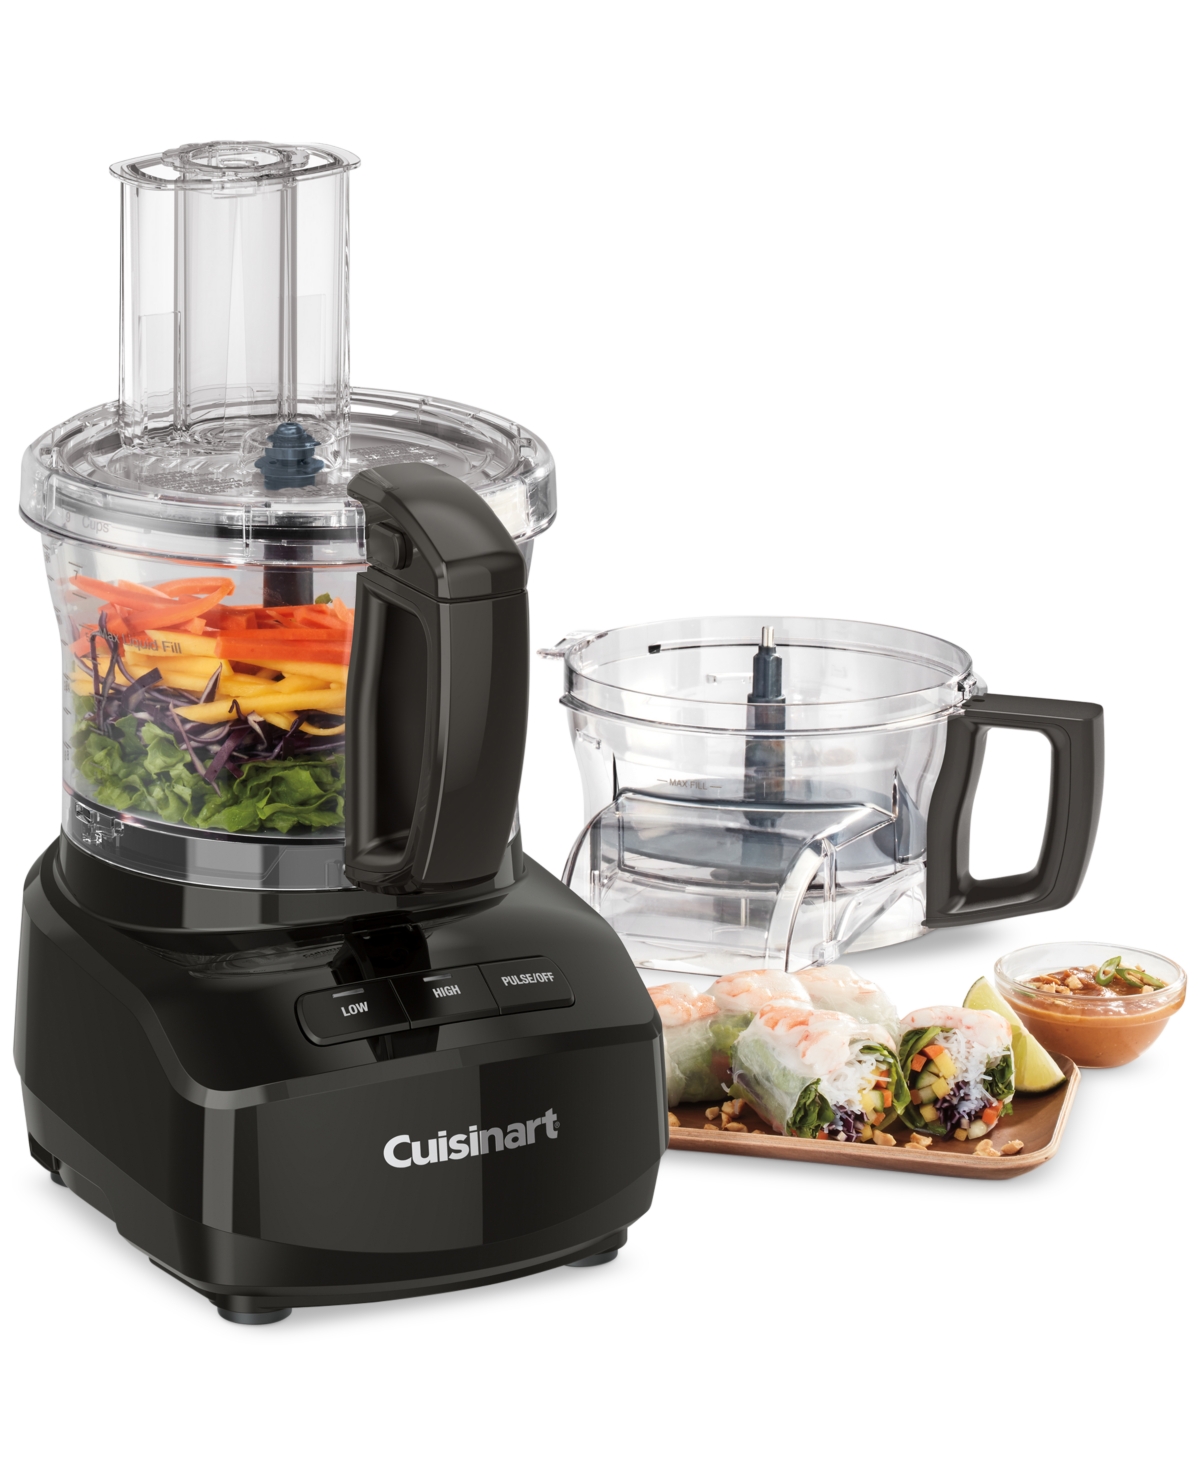 Cuisinart 9-cup Continuous Feed Food Processor In Black